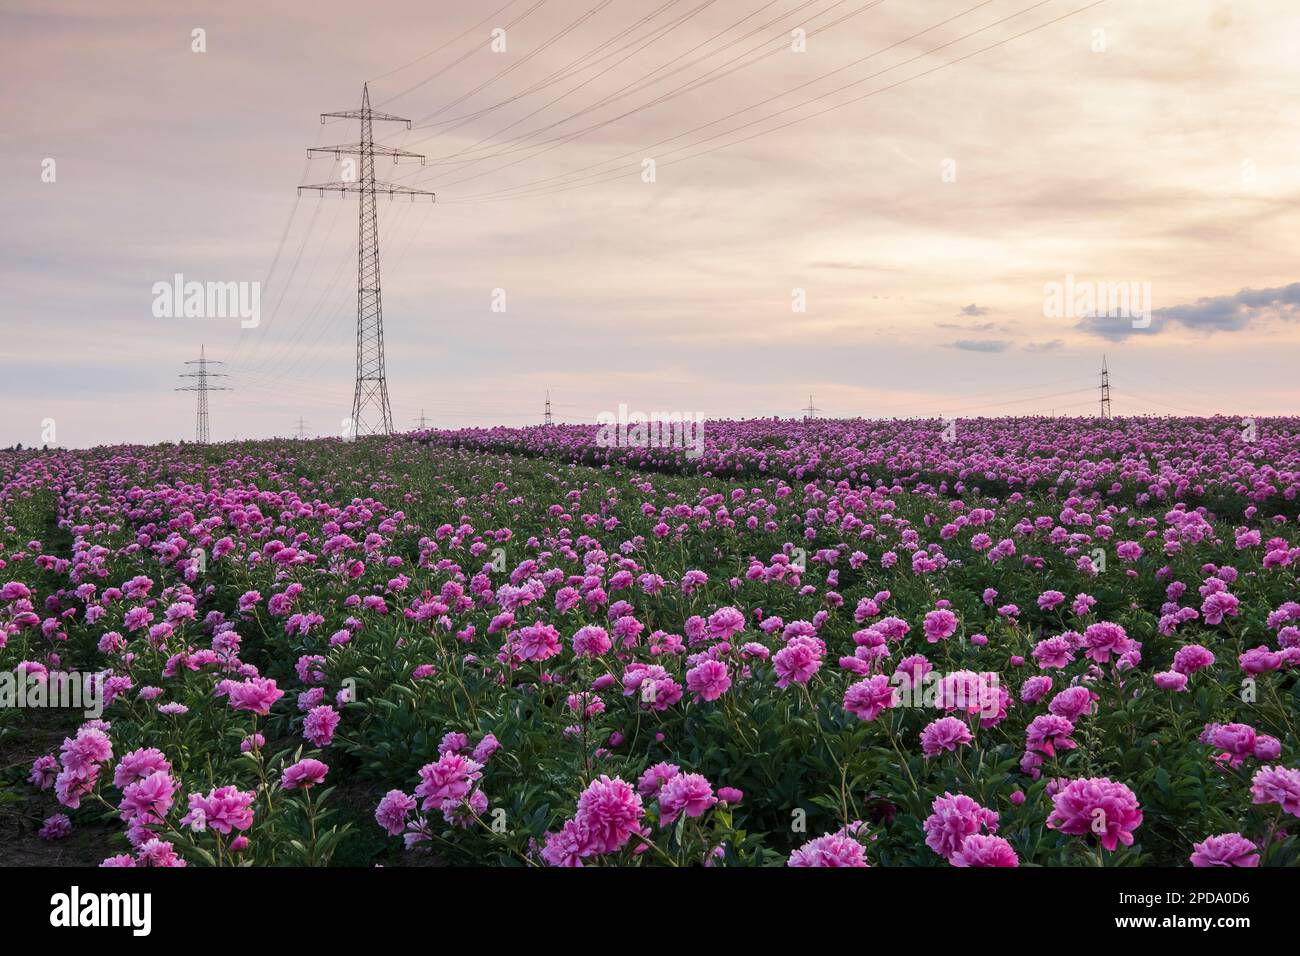 Wesseling, a field with peonies (Paeonia) and electricity pylons Stock Photo